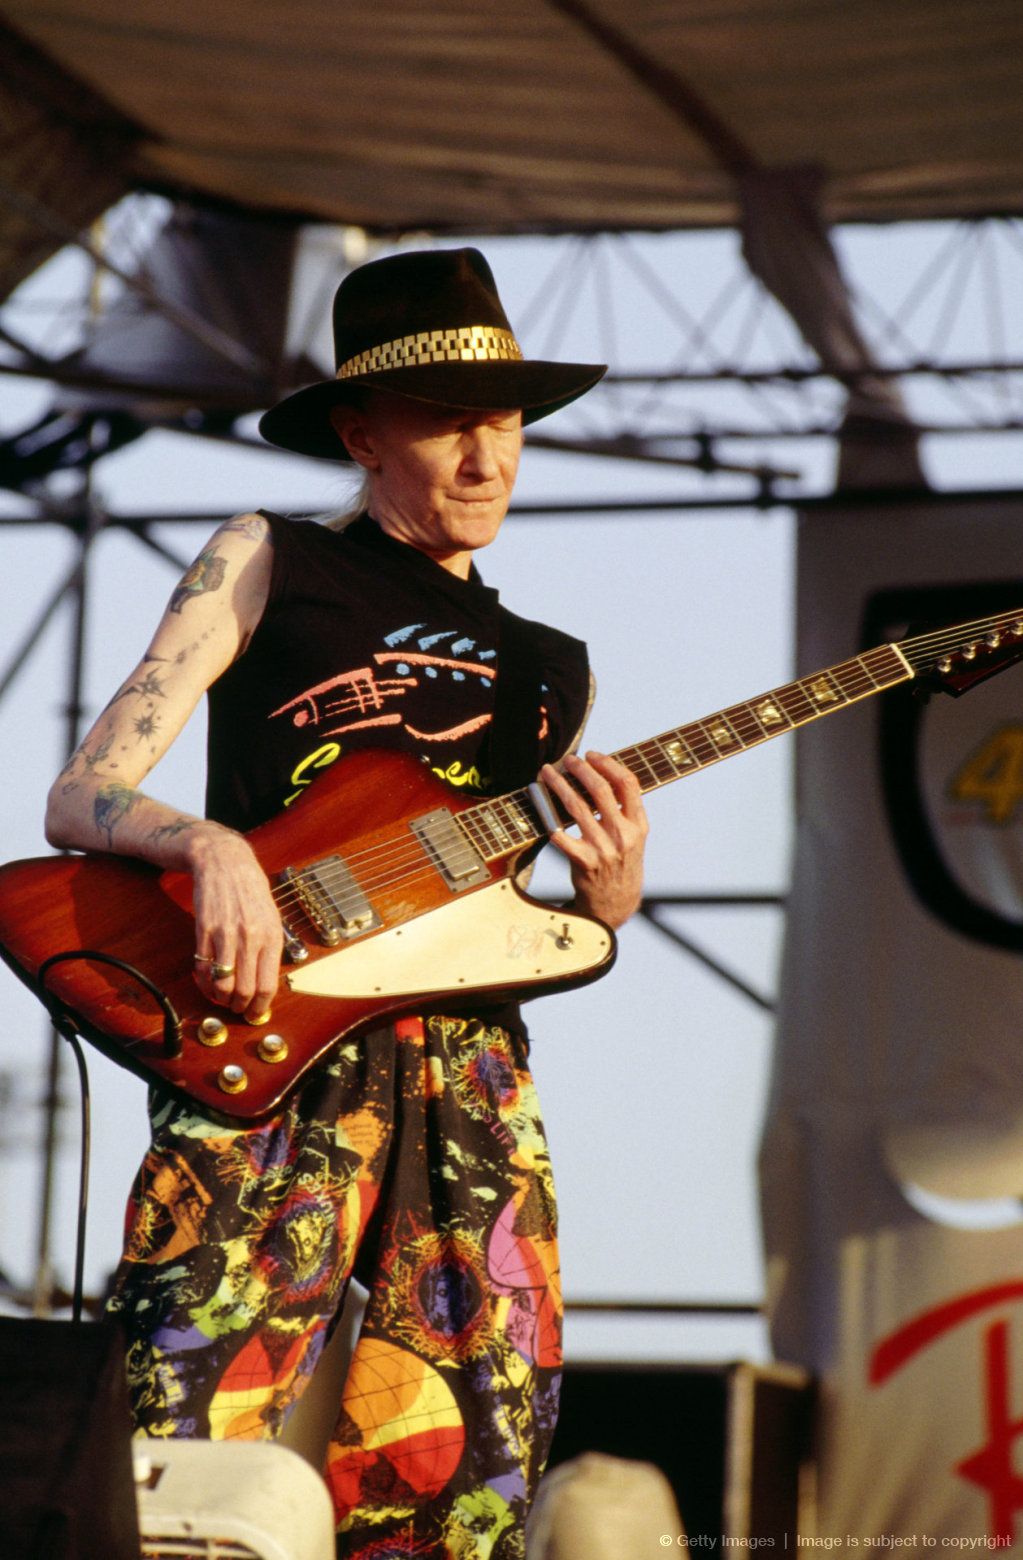 Johnny Winter, more than anyone he pioneered contemporary blues. Hid blazing renditions of the old blues masters started a fire. Blues music, Music photo, Johnny